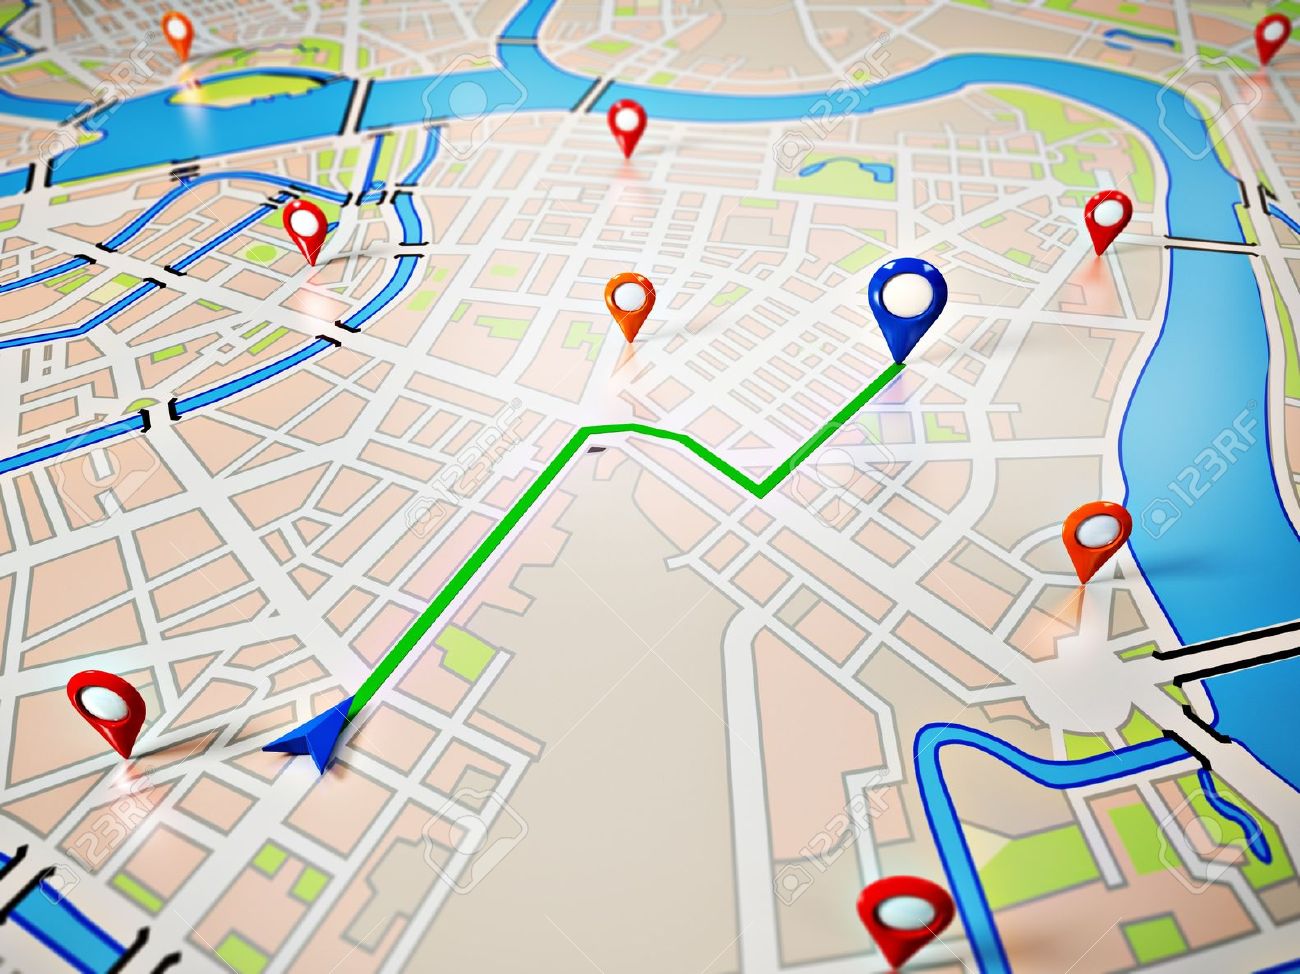 How to track cell phone location without them knowing